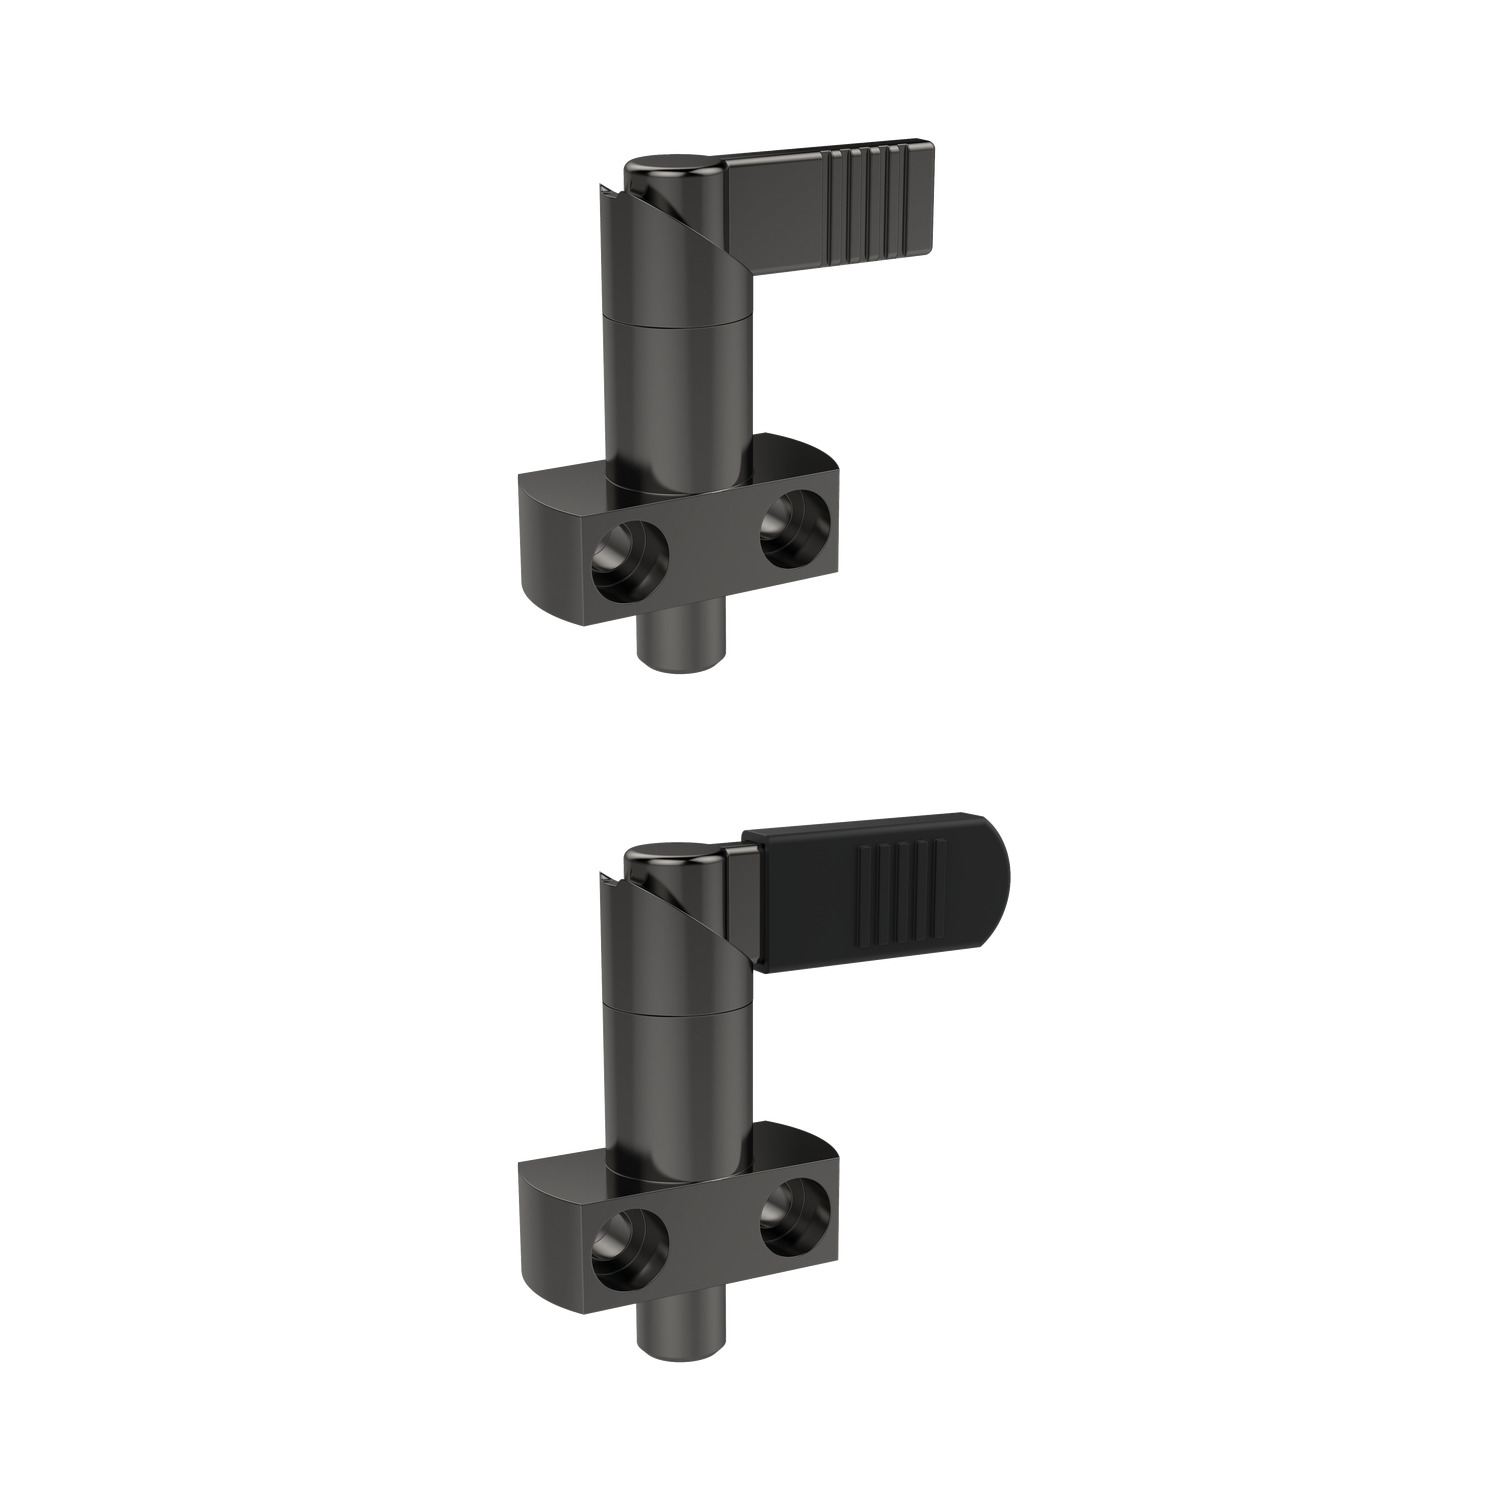 Index Plungers - Lever Grip Flange mount, locking lever grip index plunger. Counter sunk holds on both sides allow for right or left mounting. Made from blackened steel with thermoplastic grip.